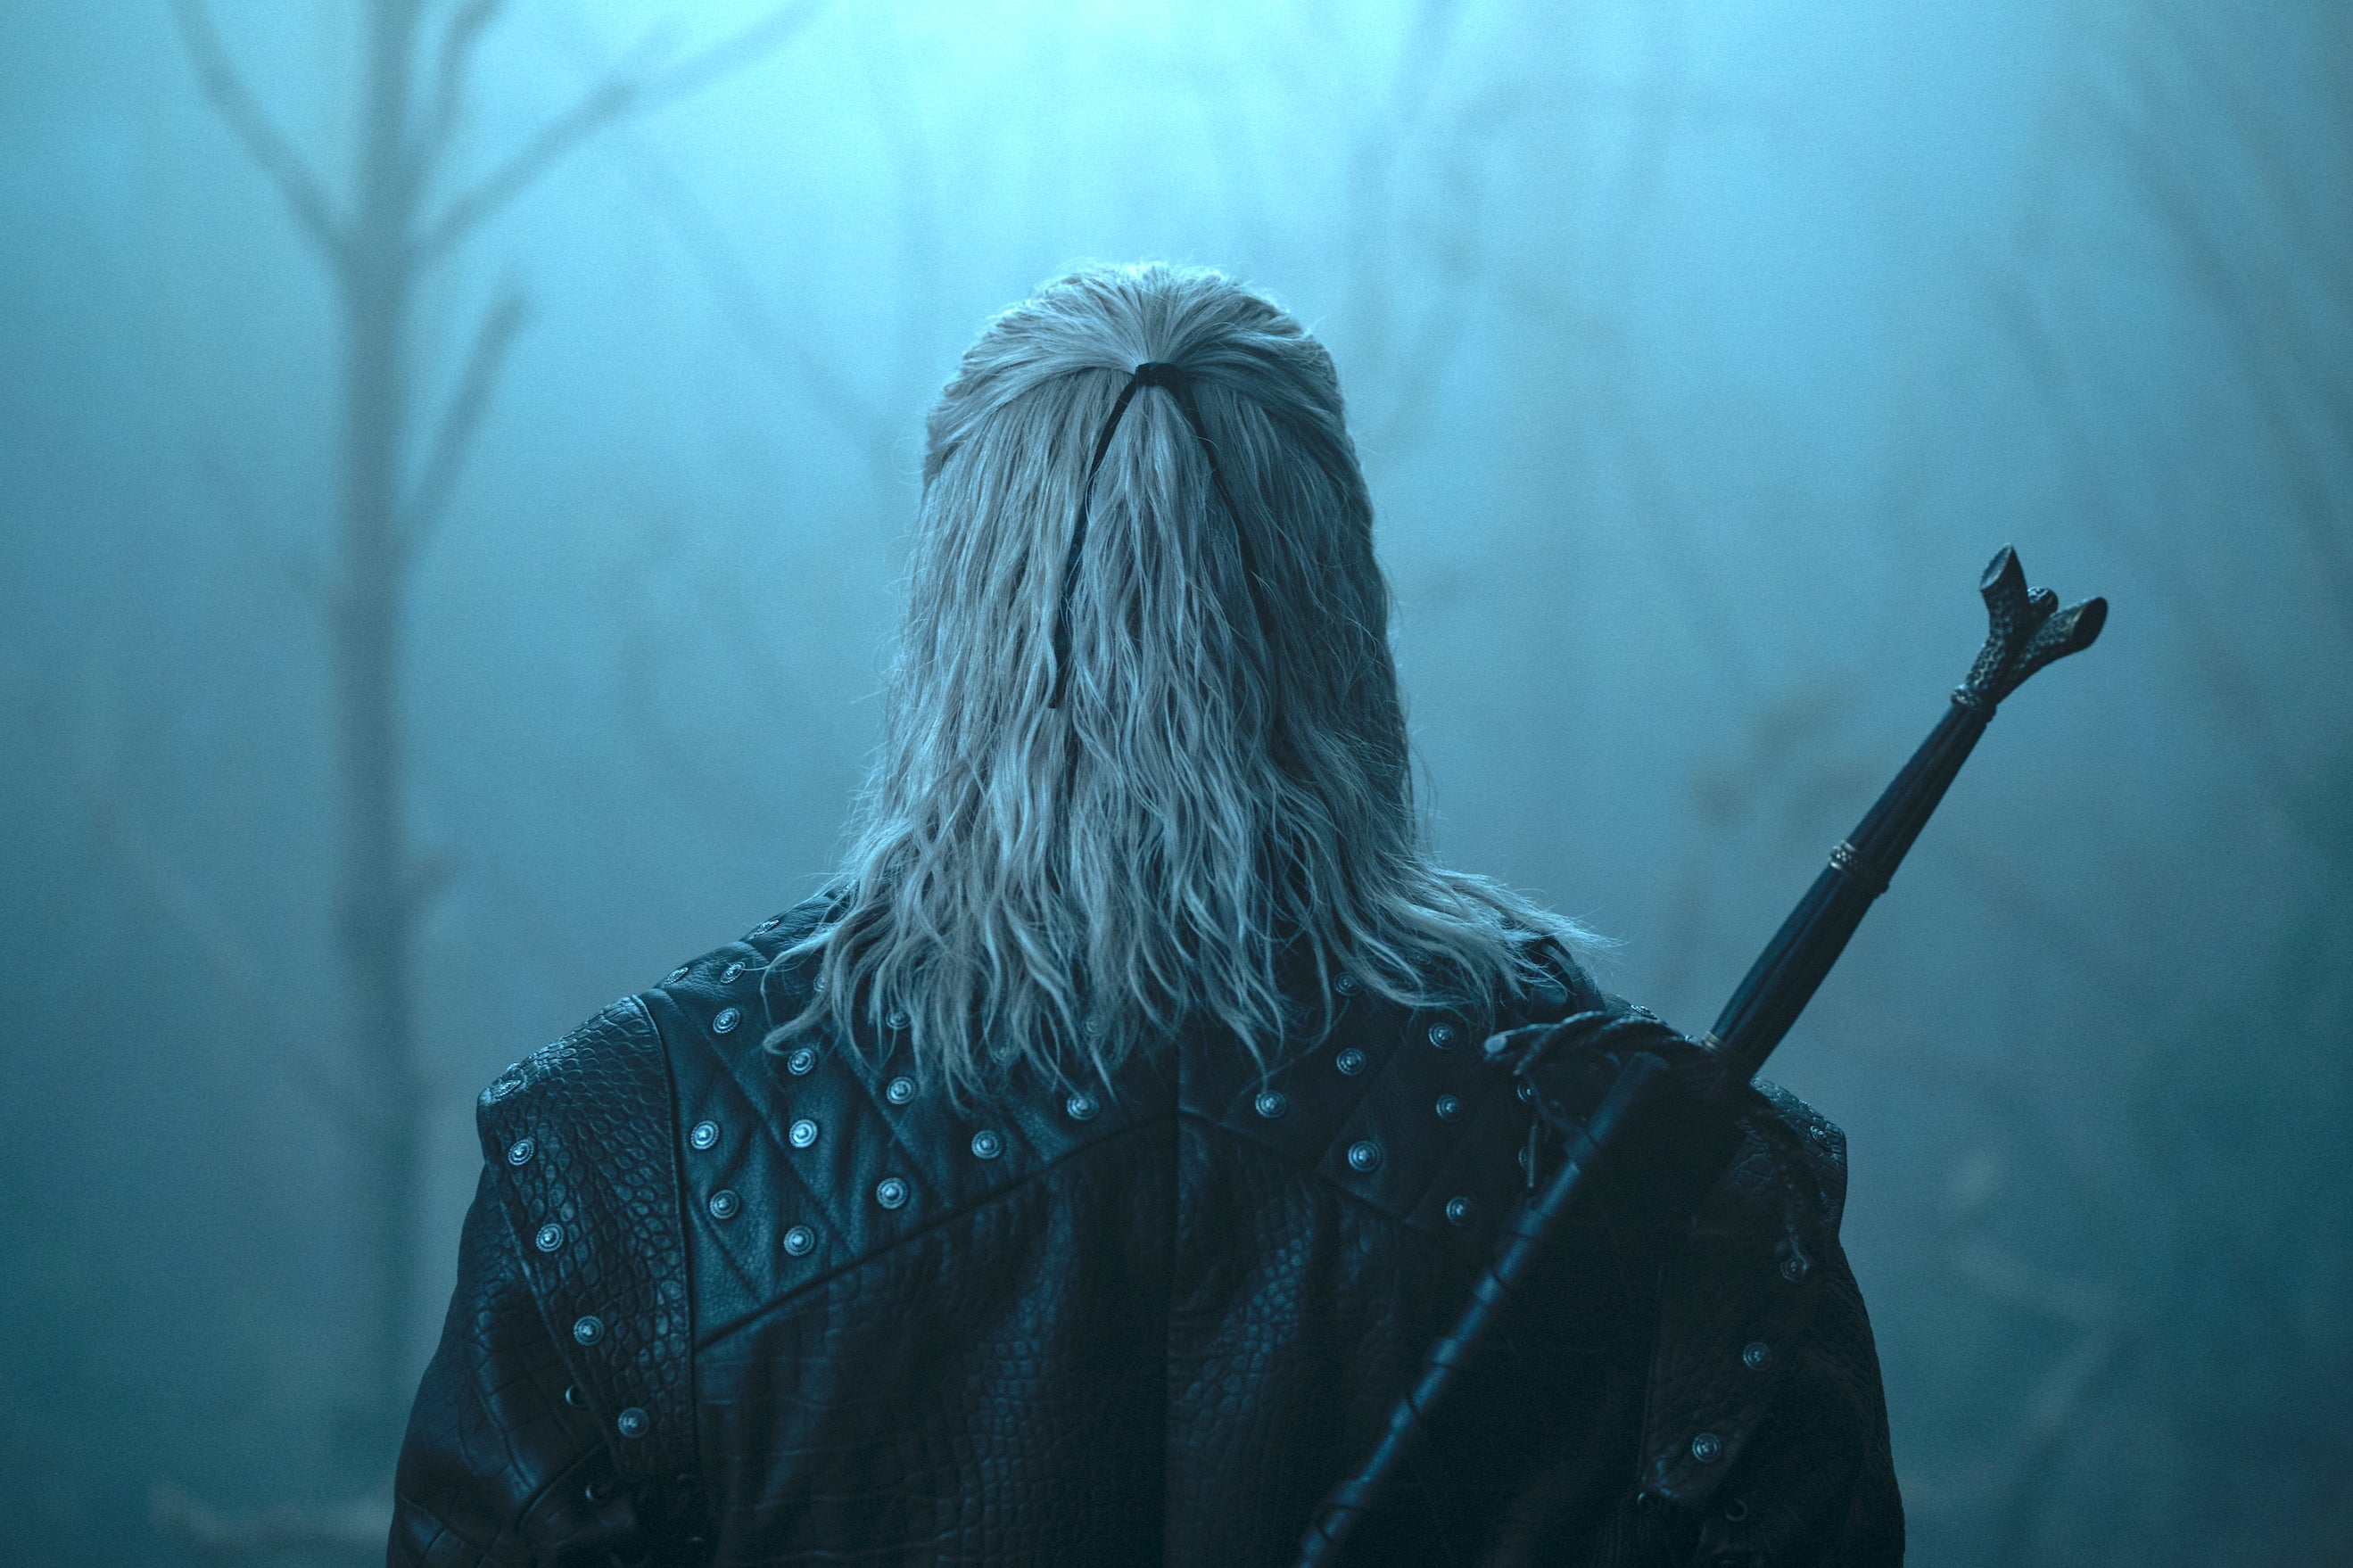 Liam Hemsworth debuts as Geralt of Rivia in ‘The Witcher’ season 4 first look